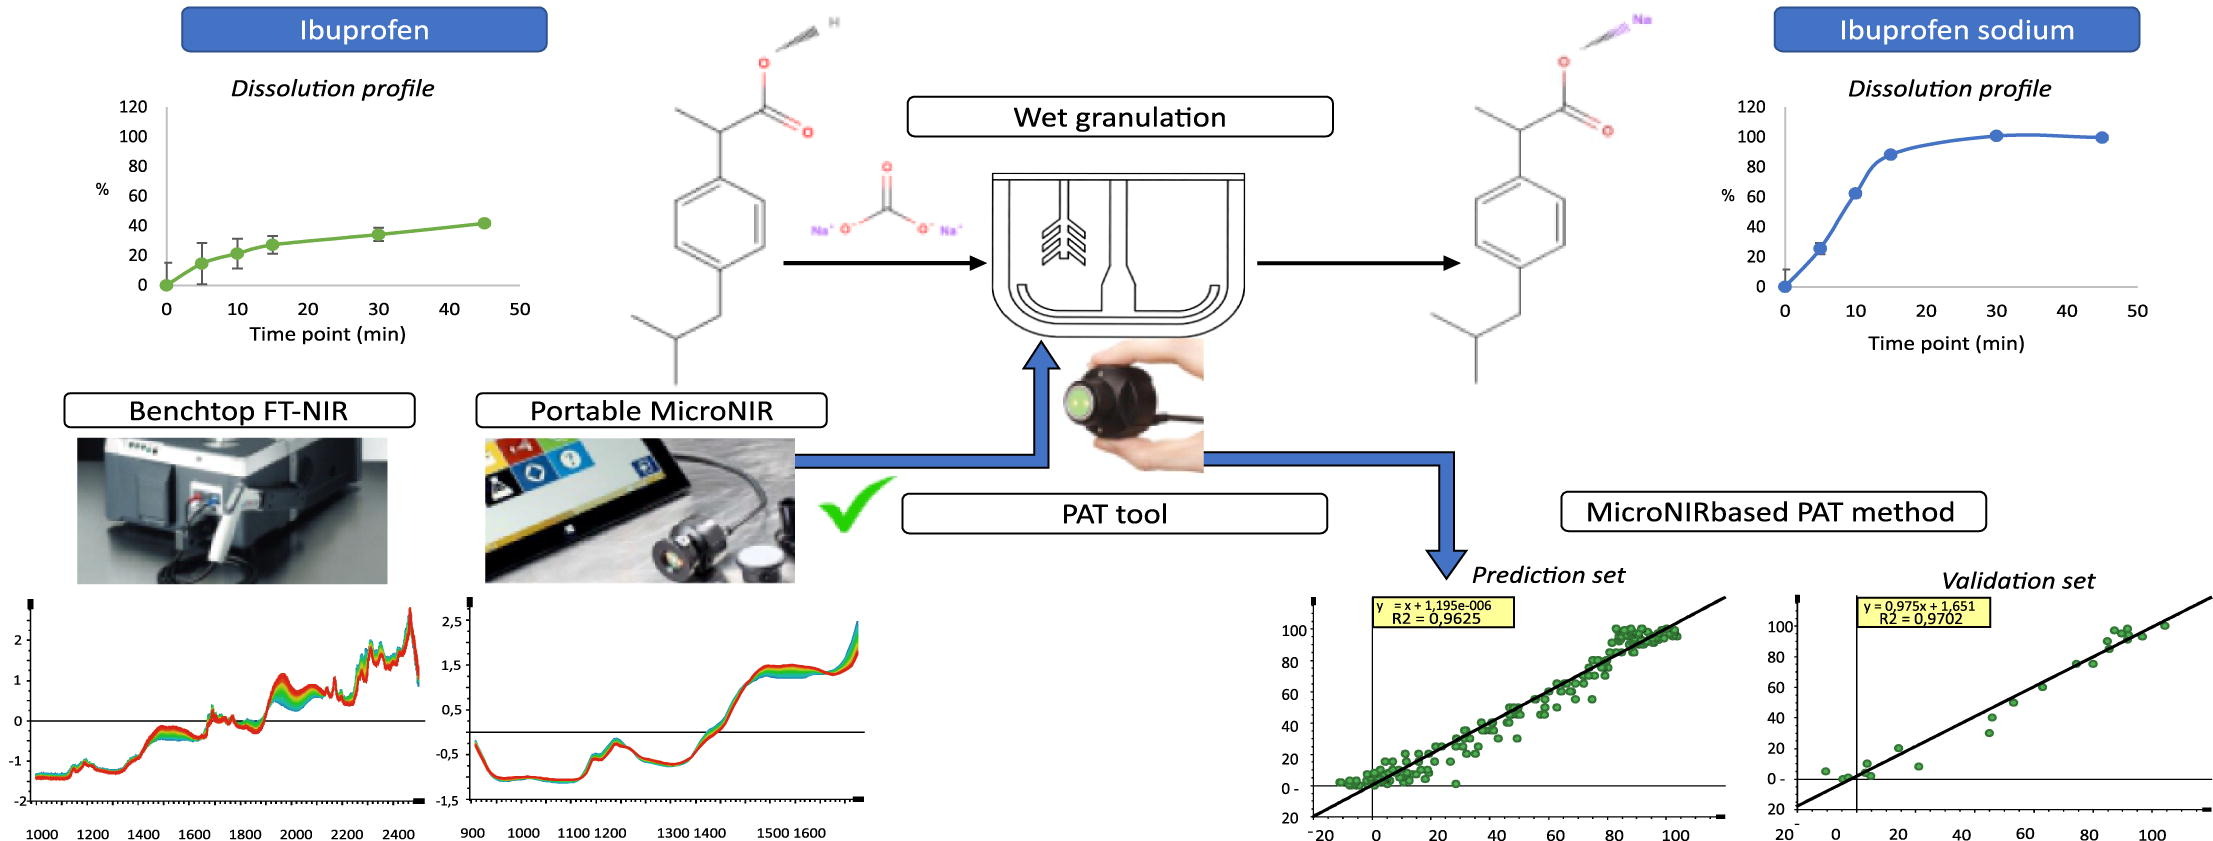 Development of novel portable NIR spectroscopy process analytical technology (PAT) tool for monitoring the transition of ibuprofen to ibuprofen sodium during wet granulation process